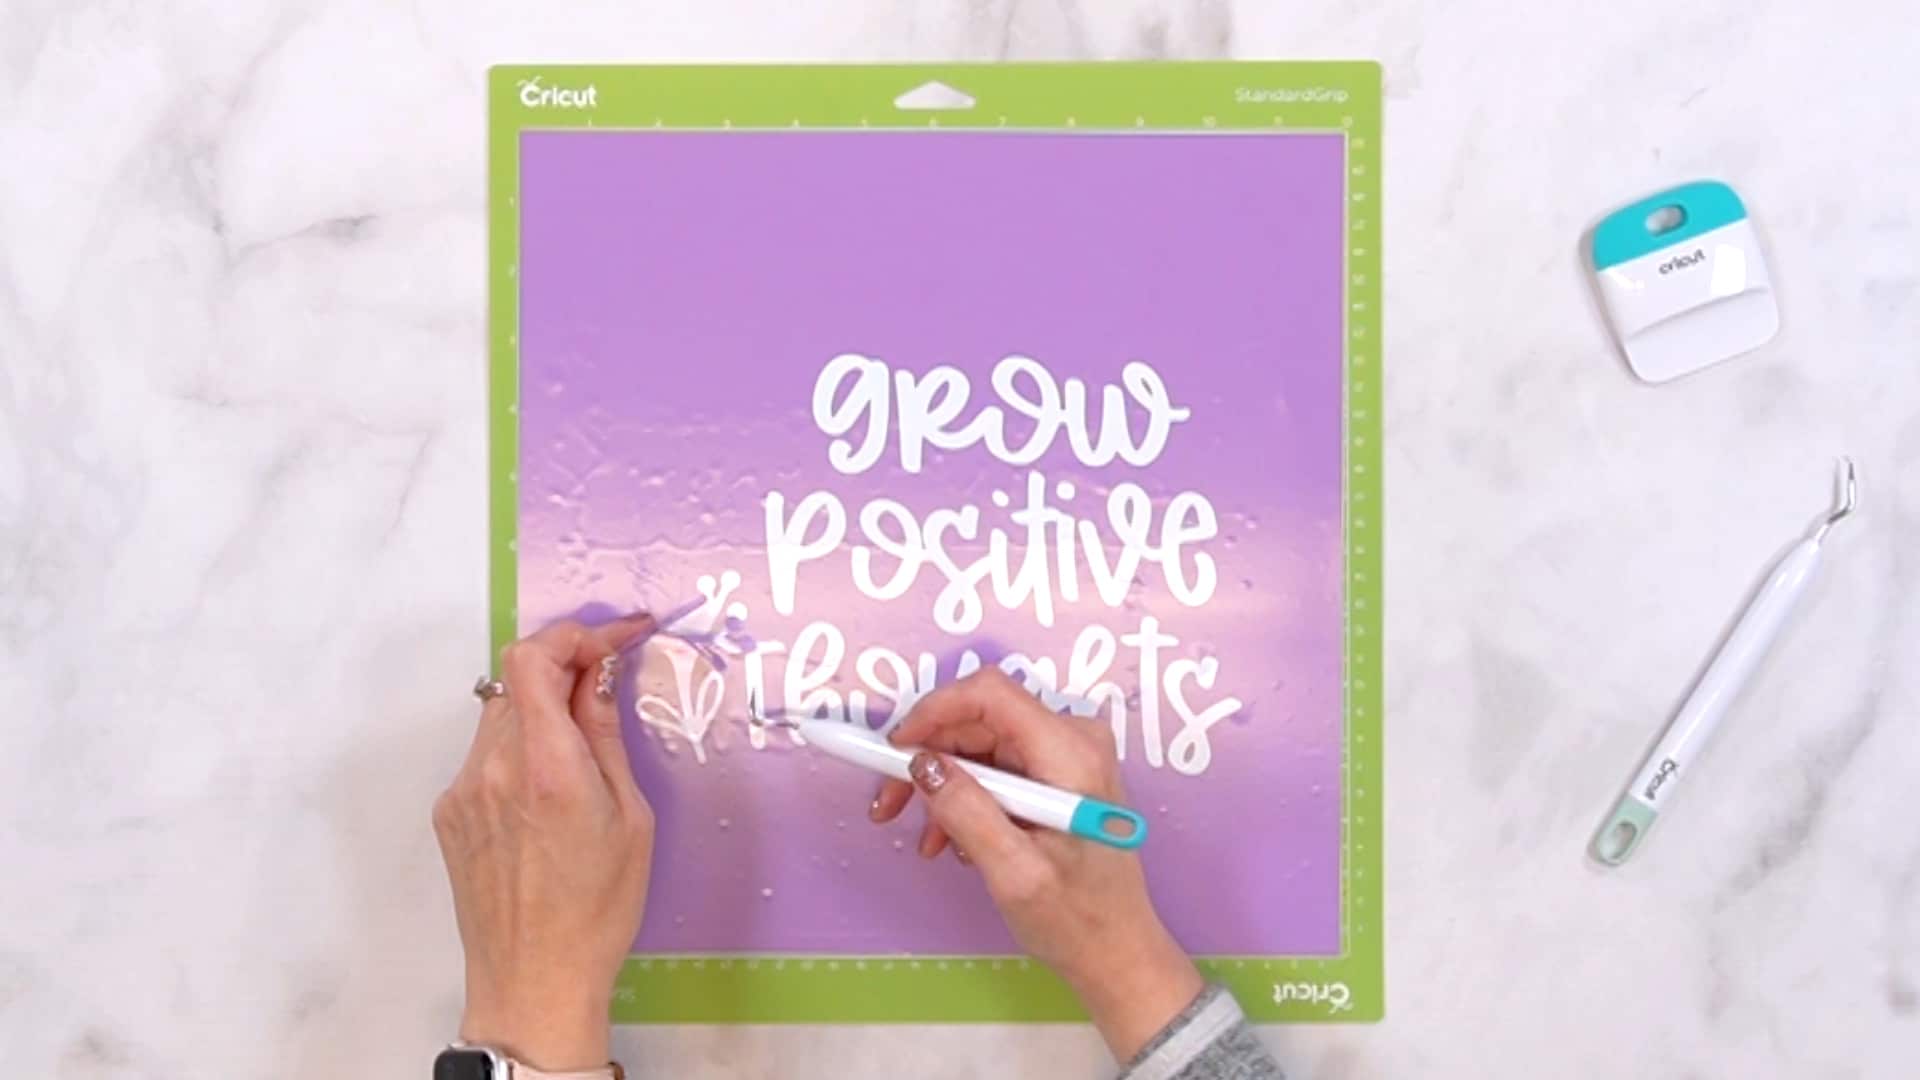 Hands using weeding tools to weed purple vinyl on a green Cricut mat